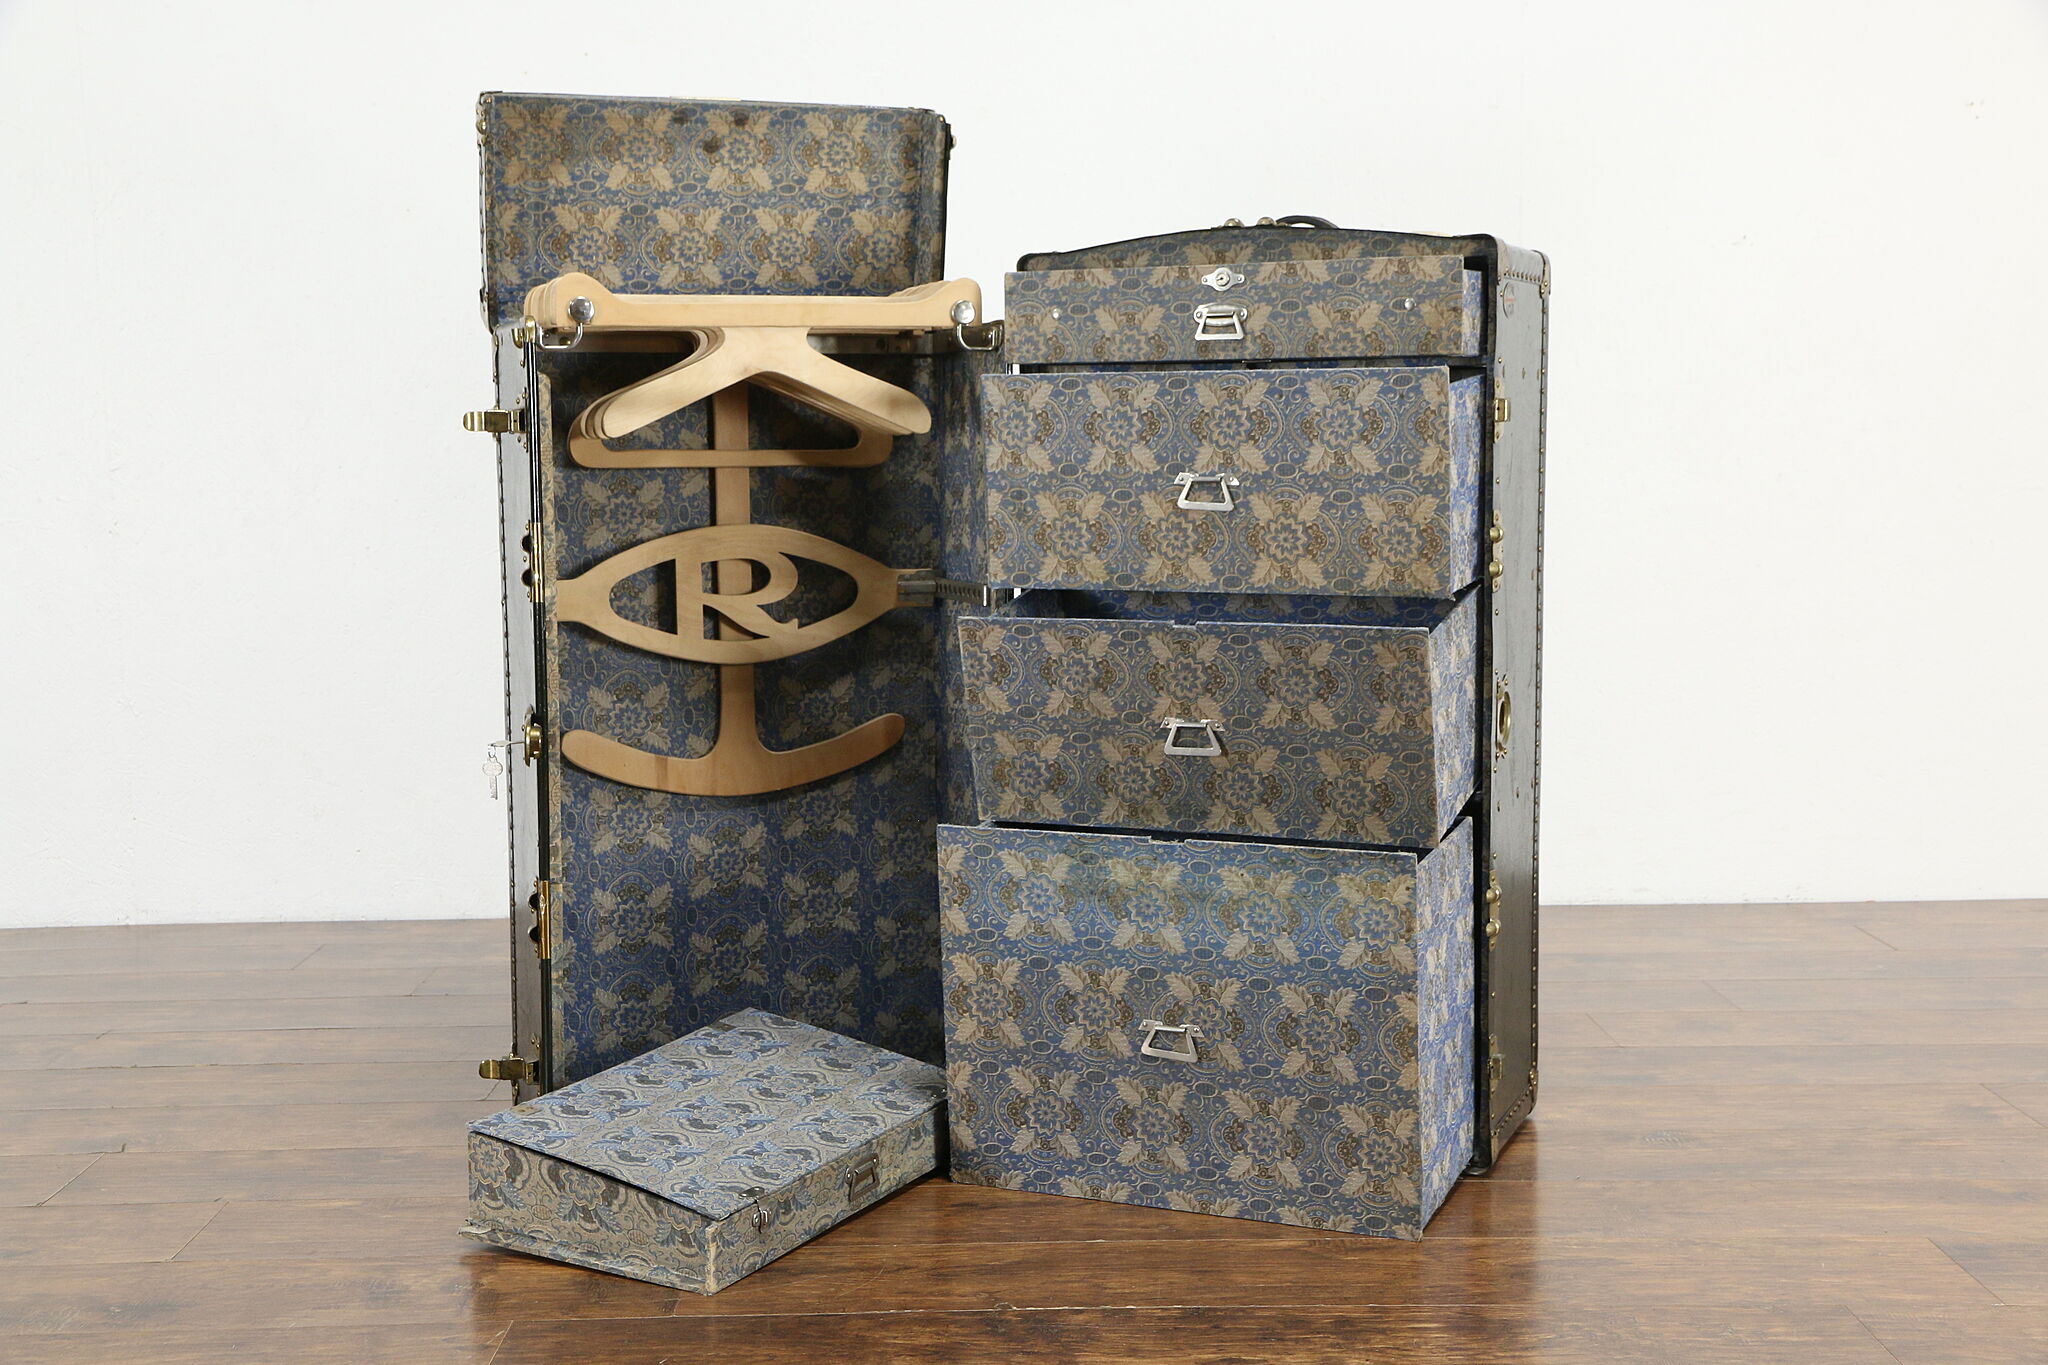 Travel Trunks from Oshkosh Trunk Company American, 1923 for sale at Pamono